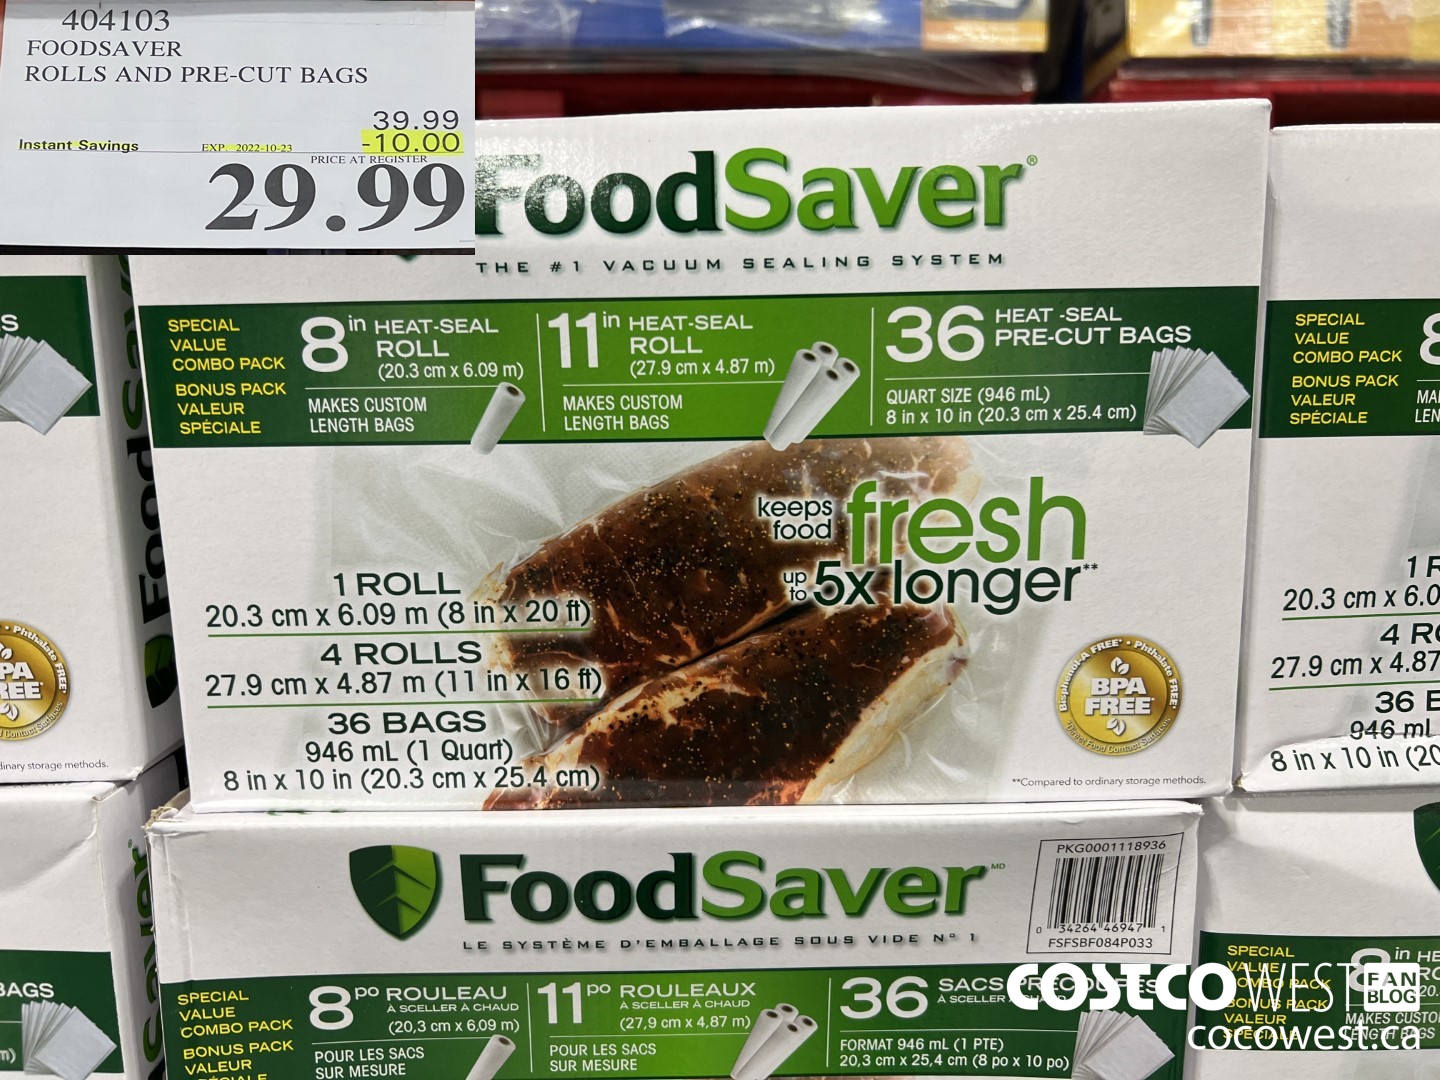 https://west.cocowest1.ca/2022/10/FOODSAVER_ROLLS_AND_PRECUT_BAGS_20221021_103926.jpg